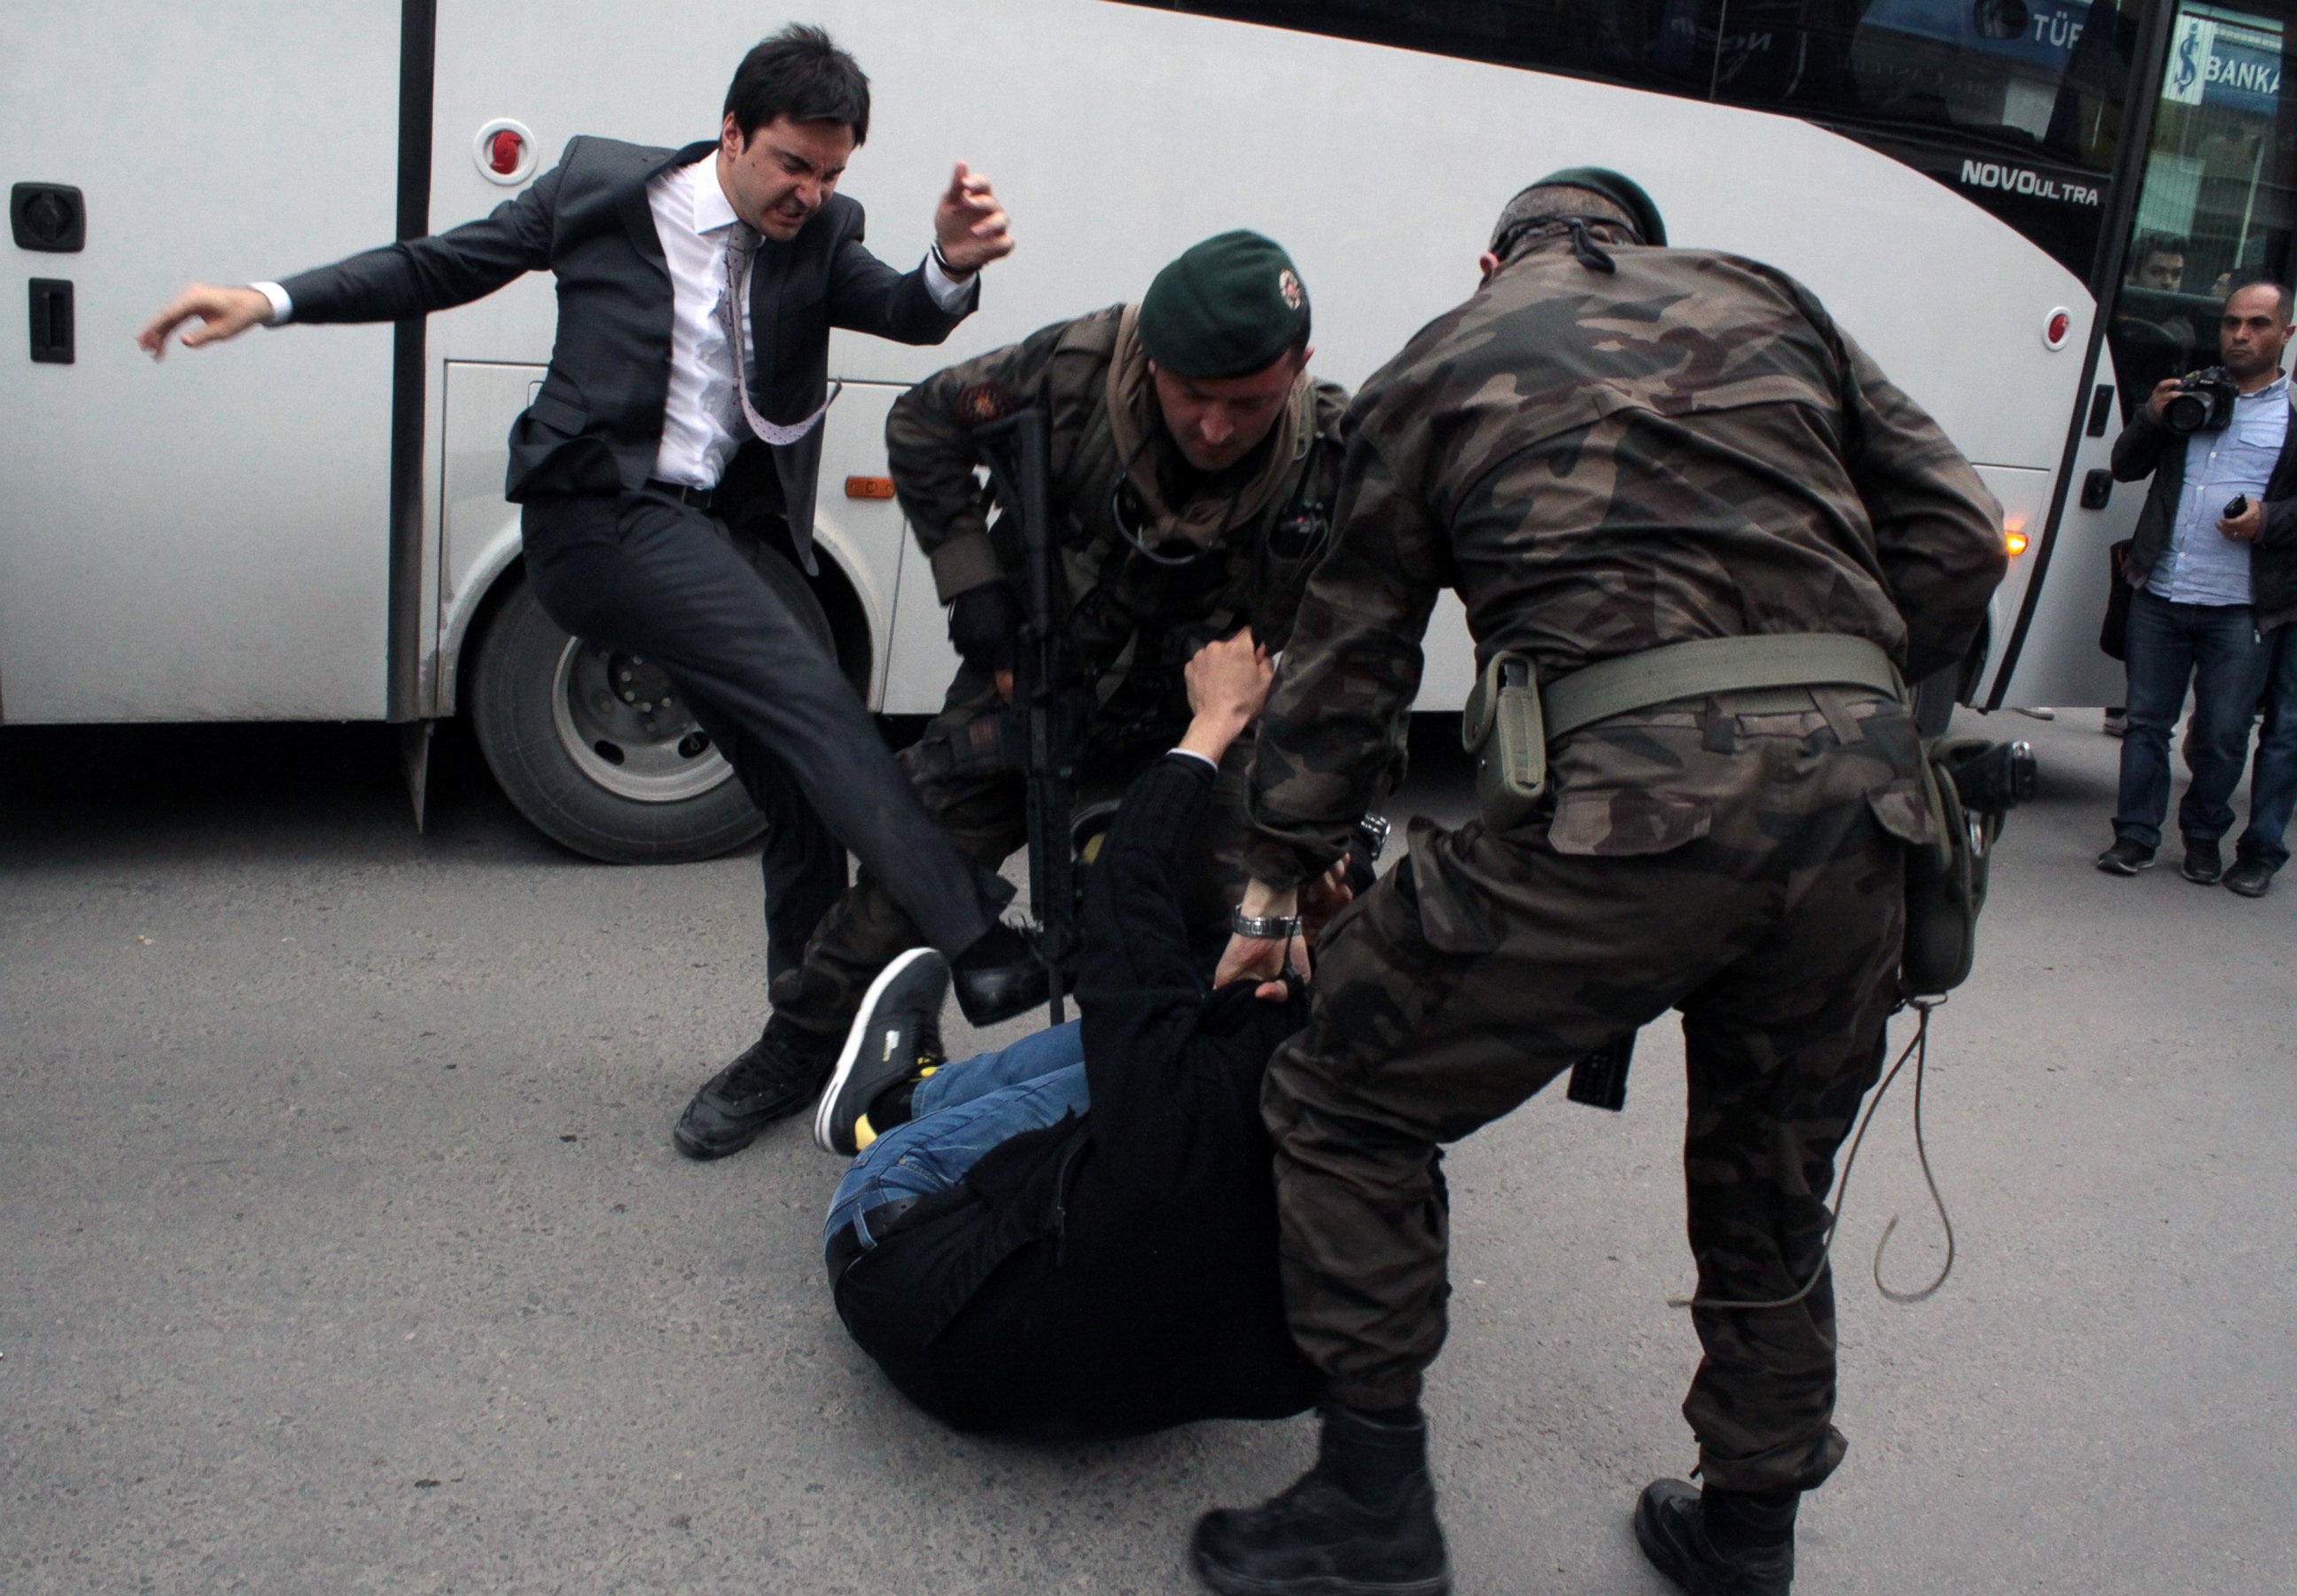 PHOTO: A person identified by Turkish media as Yusuf Yerkel, advisor to Turkish Prime Minister Recep Tayyip Erdogan, kicks a protester already held by special forces police members during Erdogan's visiting  Soma, Turkey, May 14, 2014.